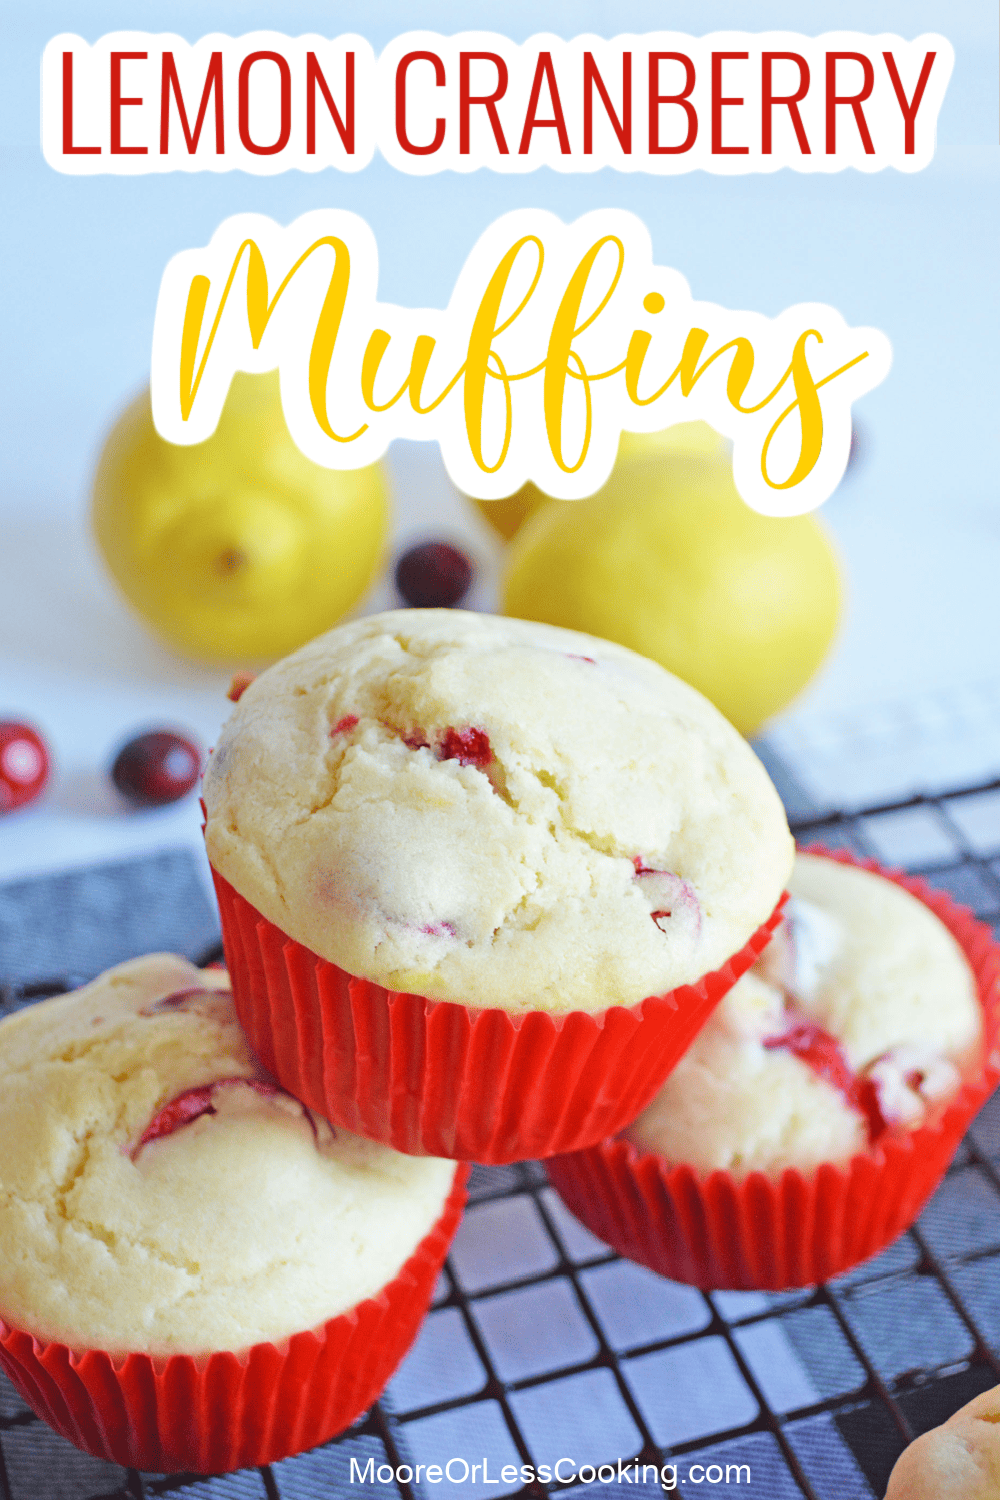 These Lemon Cranberry Muffins are an easy way to enjoy the tartness of those ruby red berries in a sweet batter that's brightened with citrus. Delicious for breakfast or a snack, these made-from-scratch muffins are perfect for the holidays and beyond. via @Mooreorlesscook